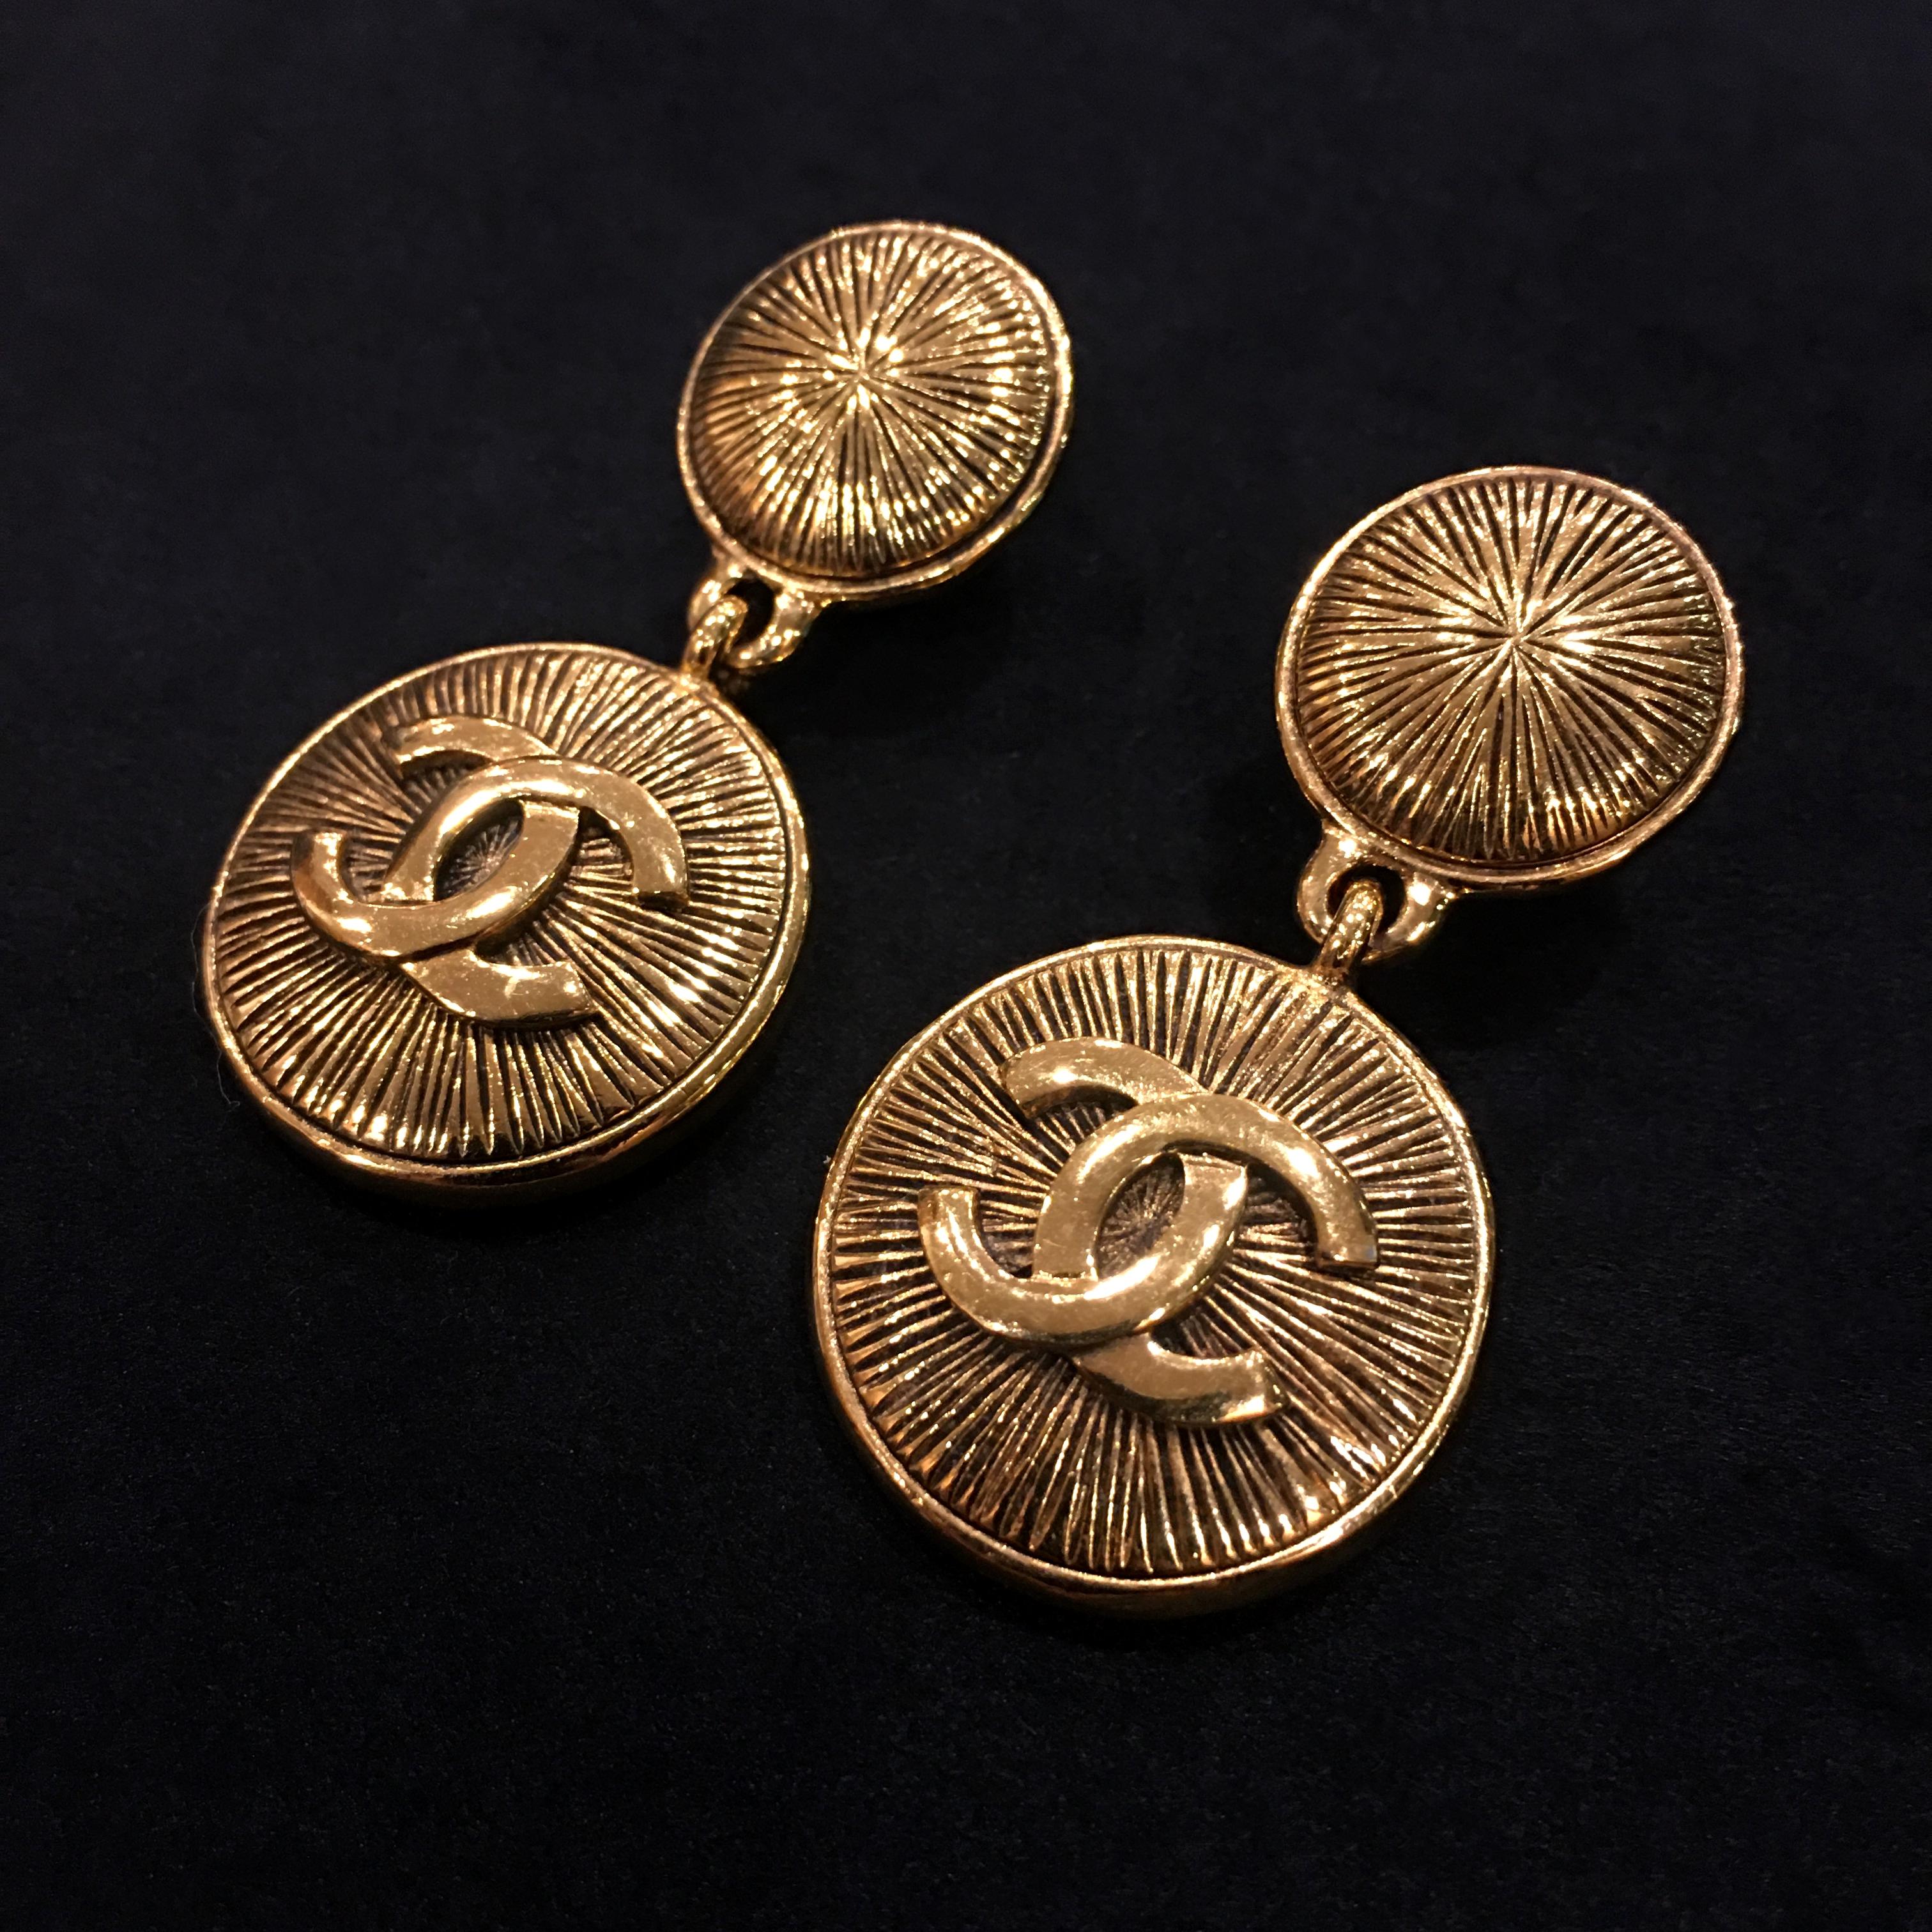 Brand: Chanel
Reference: JW379
Measurement of Earrings: 2.5cm x 4.8cm
Material: Gilt Metal
Year: 1980’s
Made in France

Please Note: the jewelries are guarantee 100% authentic pre-owned therefore might have signs of tarnish or oxidation , please